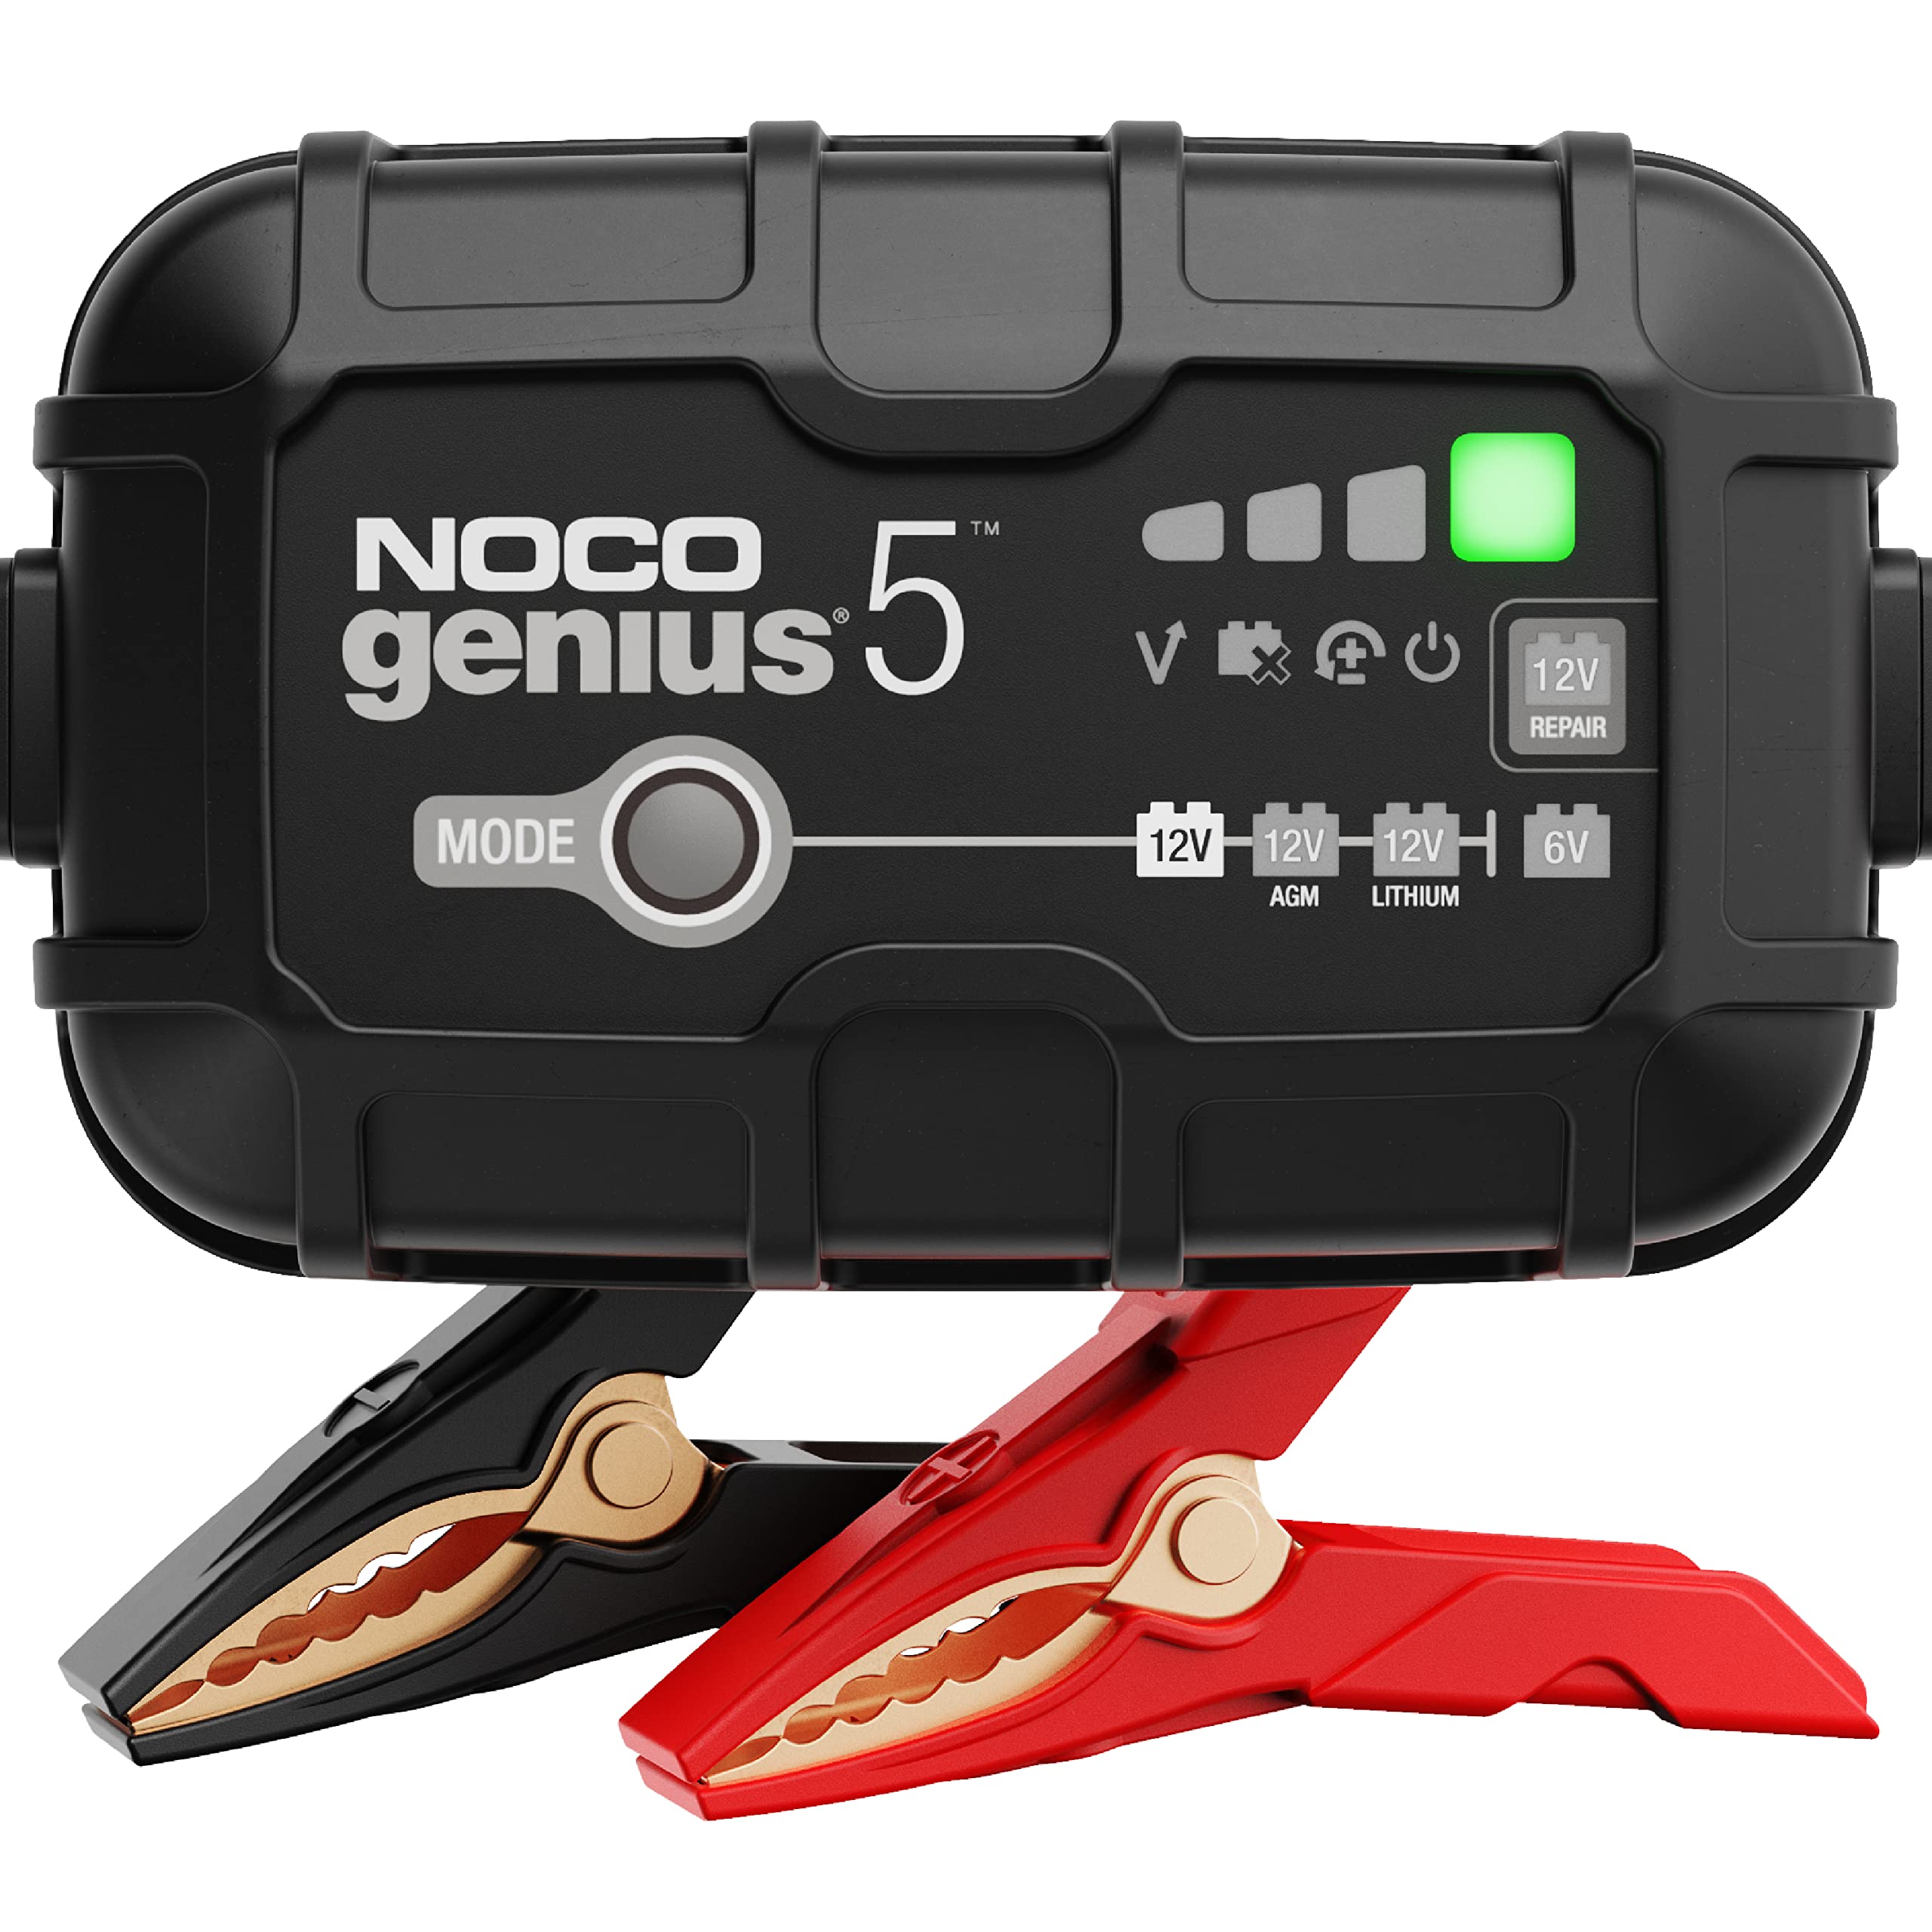 NOCO GENIUS5, 5A Smart Car Battery Charger, 6V and 12V ...